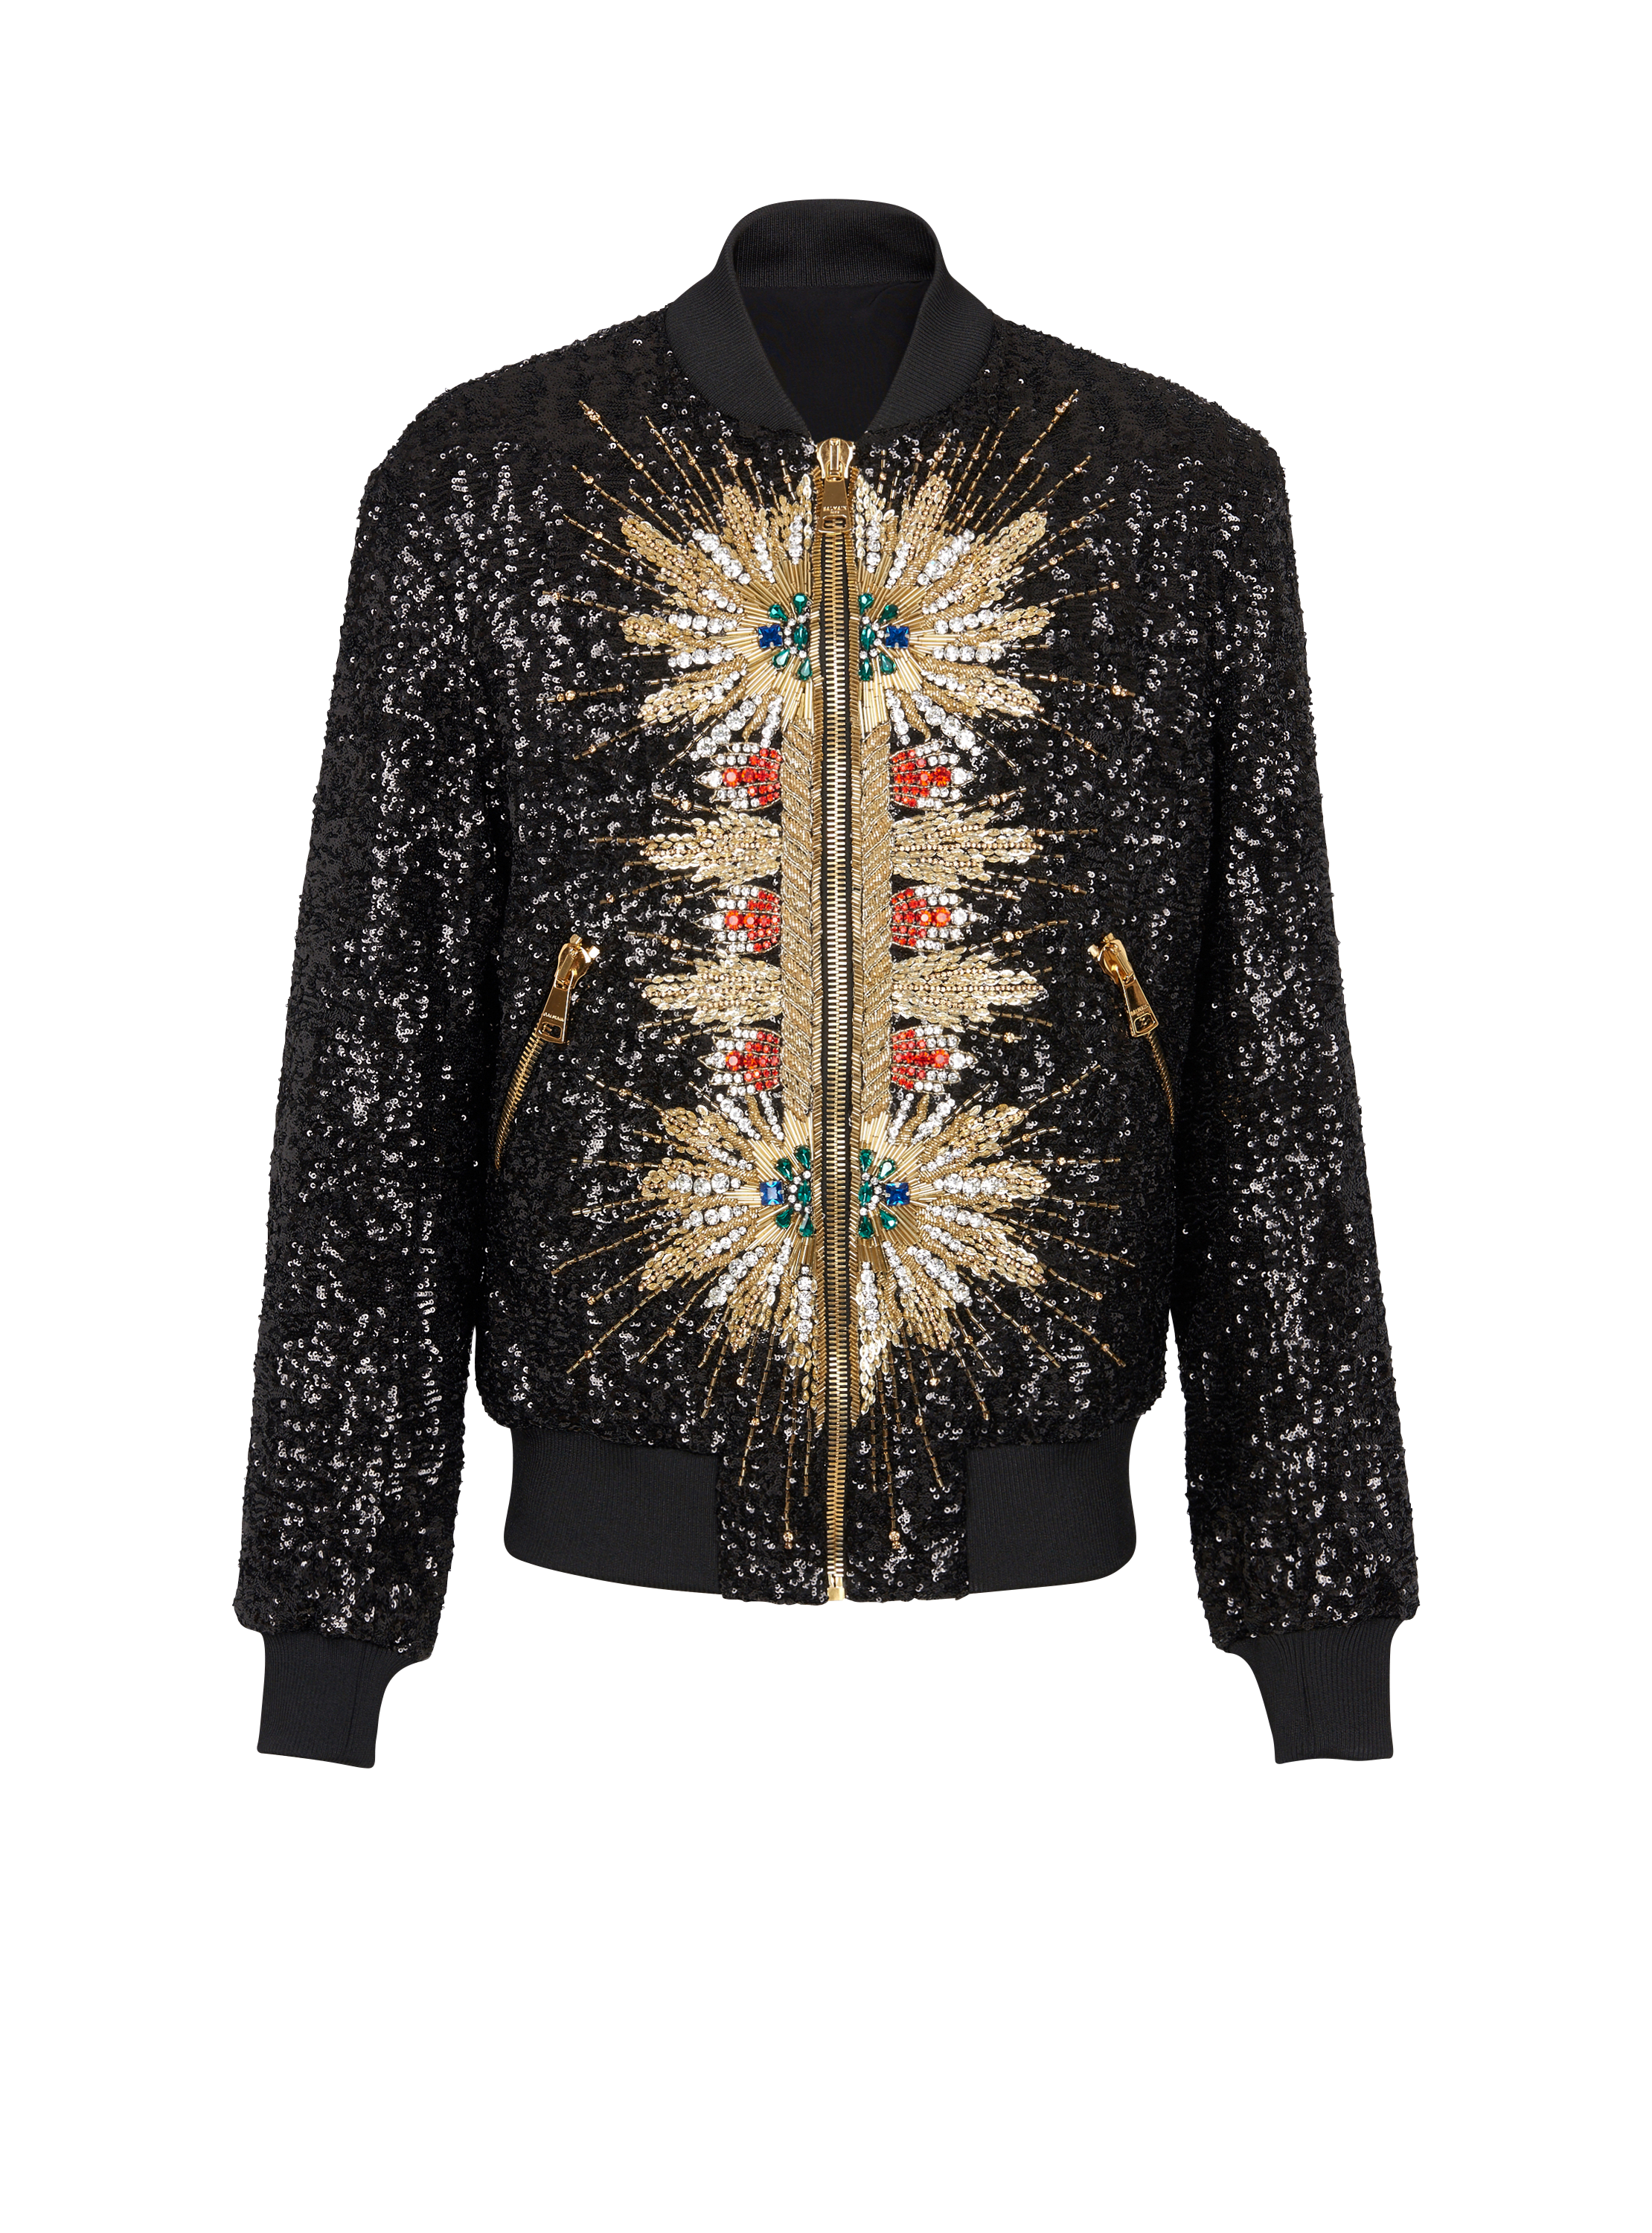 Zipped jacket with embroidery